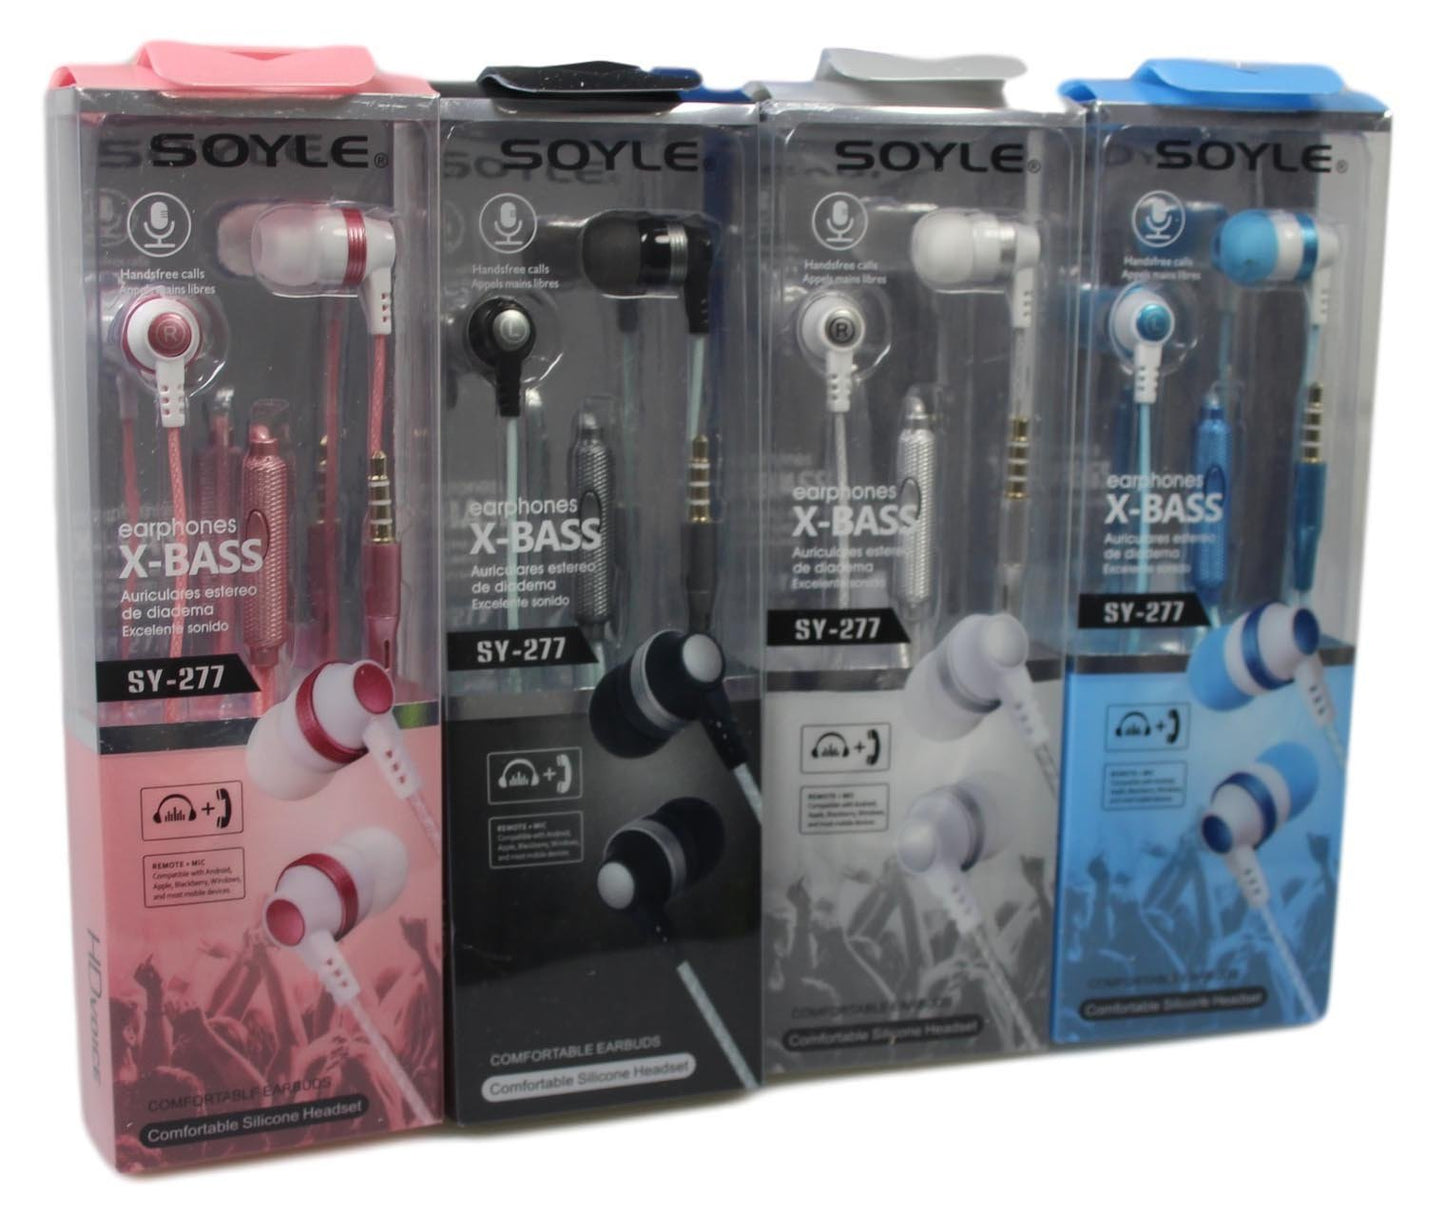 Soyle X-Bass Earphones Comfortable Silicone Headset 4 Colours Available  5270 (Parcel Rate)